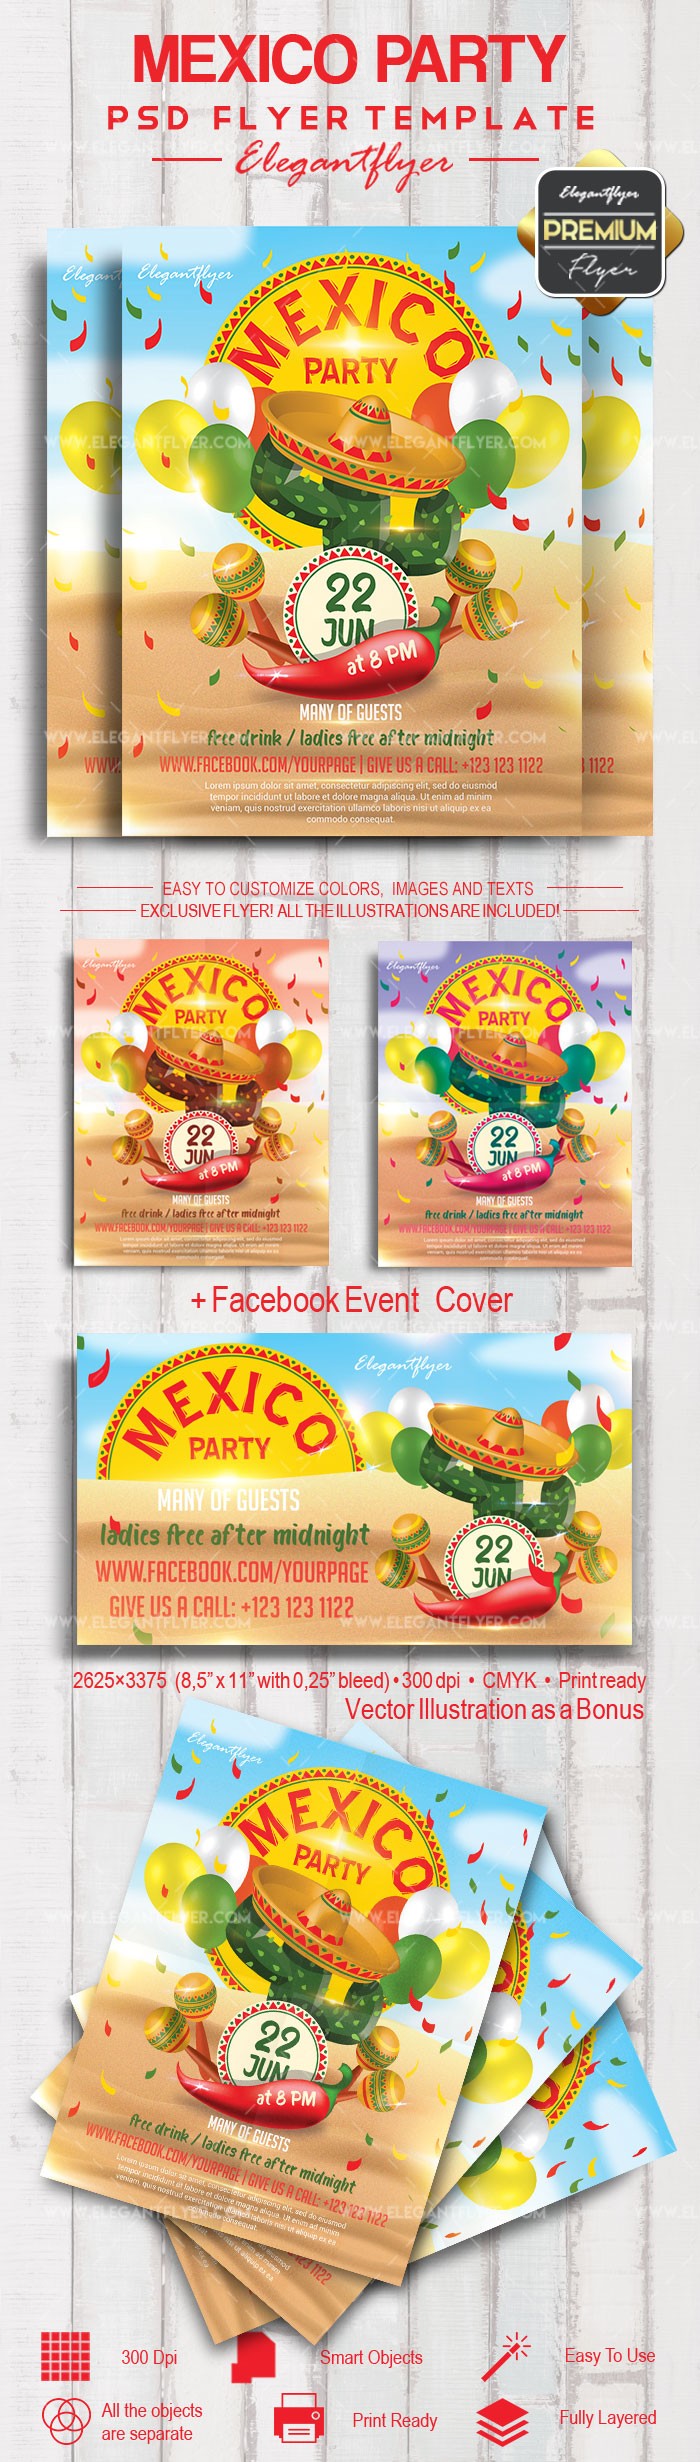 Mexico Party Event by ElegantFlyer